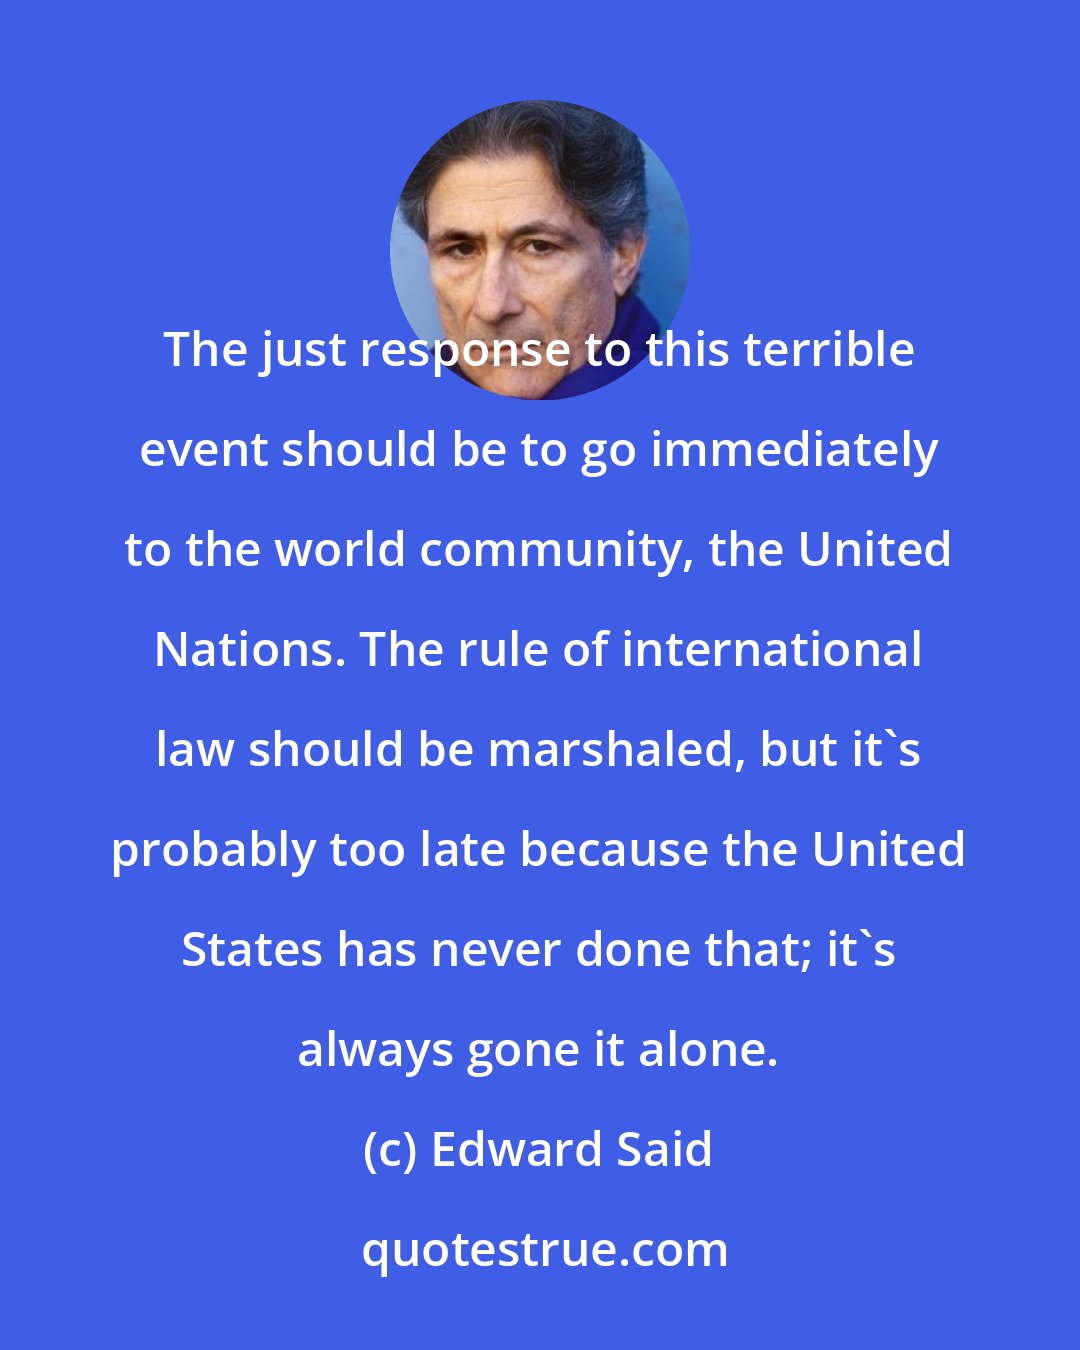 Edward Said: The just response to this terrible event should be to go immediately to the world community, the United Nations. The rule of international law should be marshaled, but it's probably too late because the United States has never done that; it's always gone it alone.